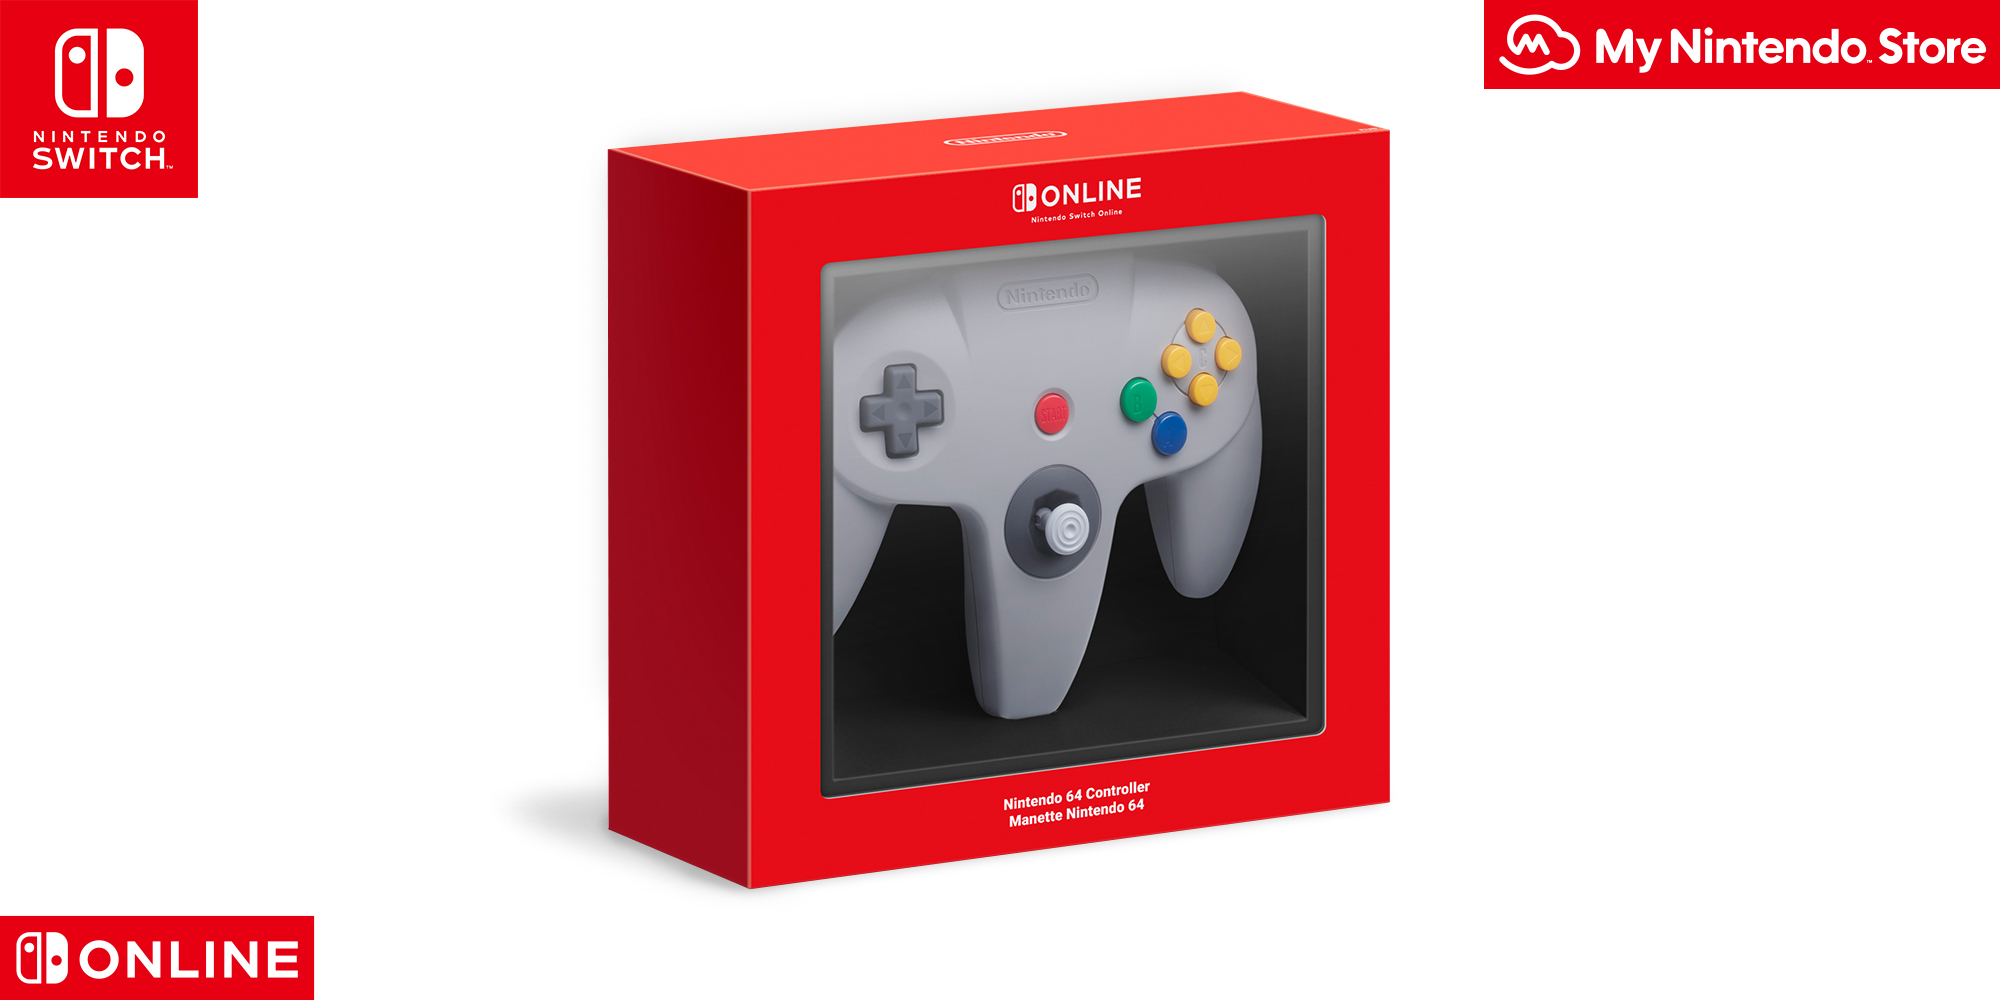 Pre-orders for the Nintendo 64 controller are open for Nintendo Switch Online members! | News | Nintendo